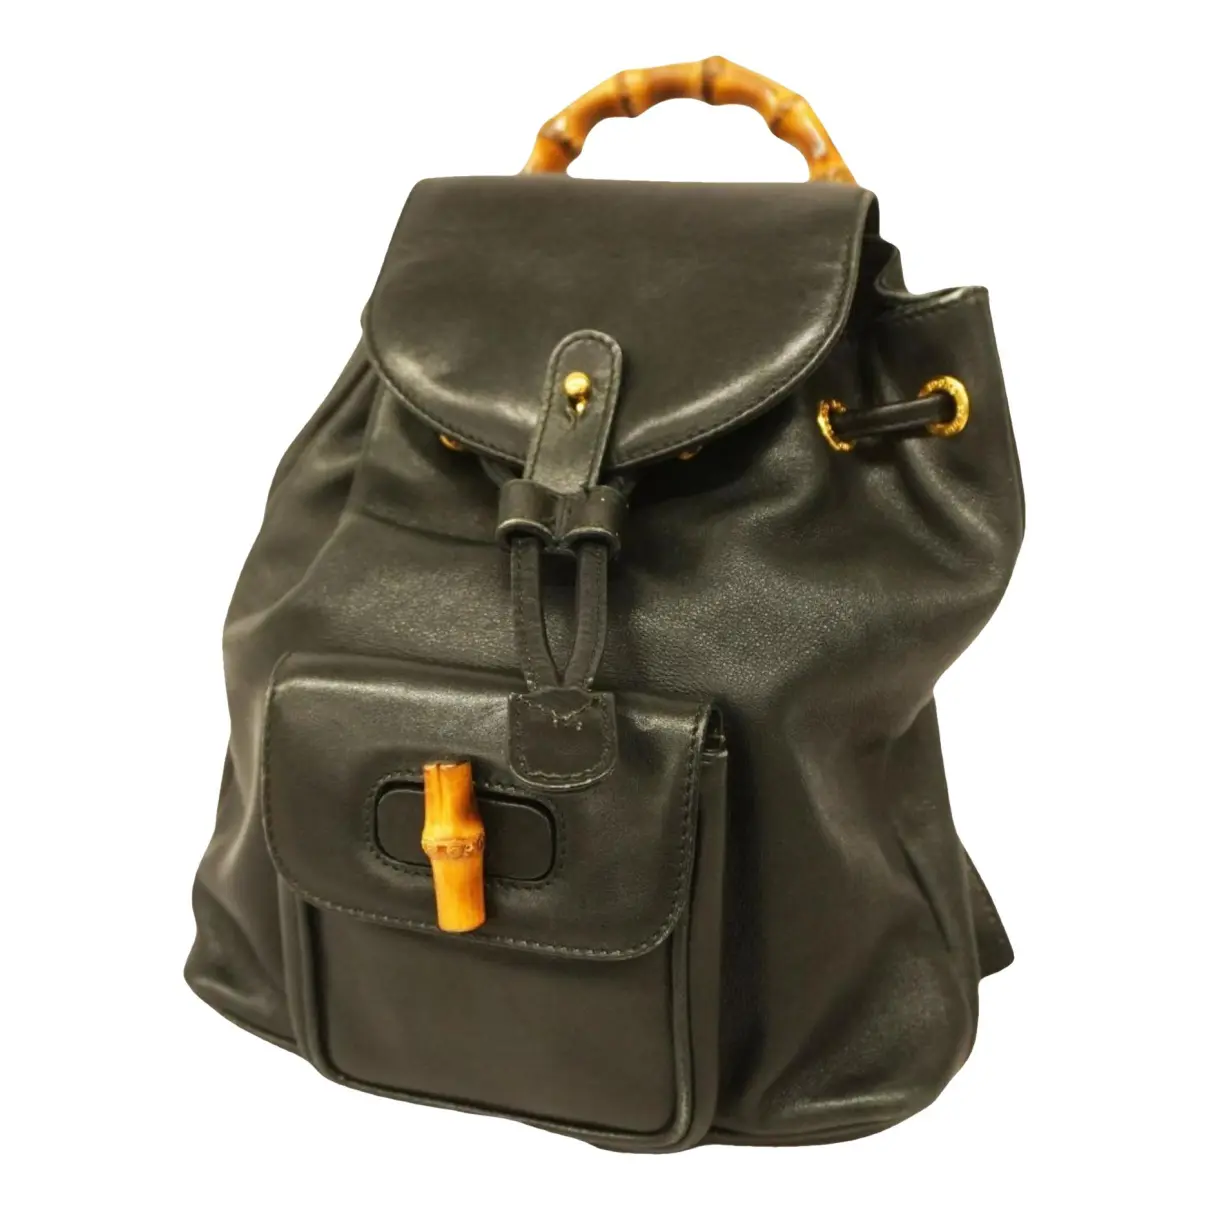 Bamboo leather backpack